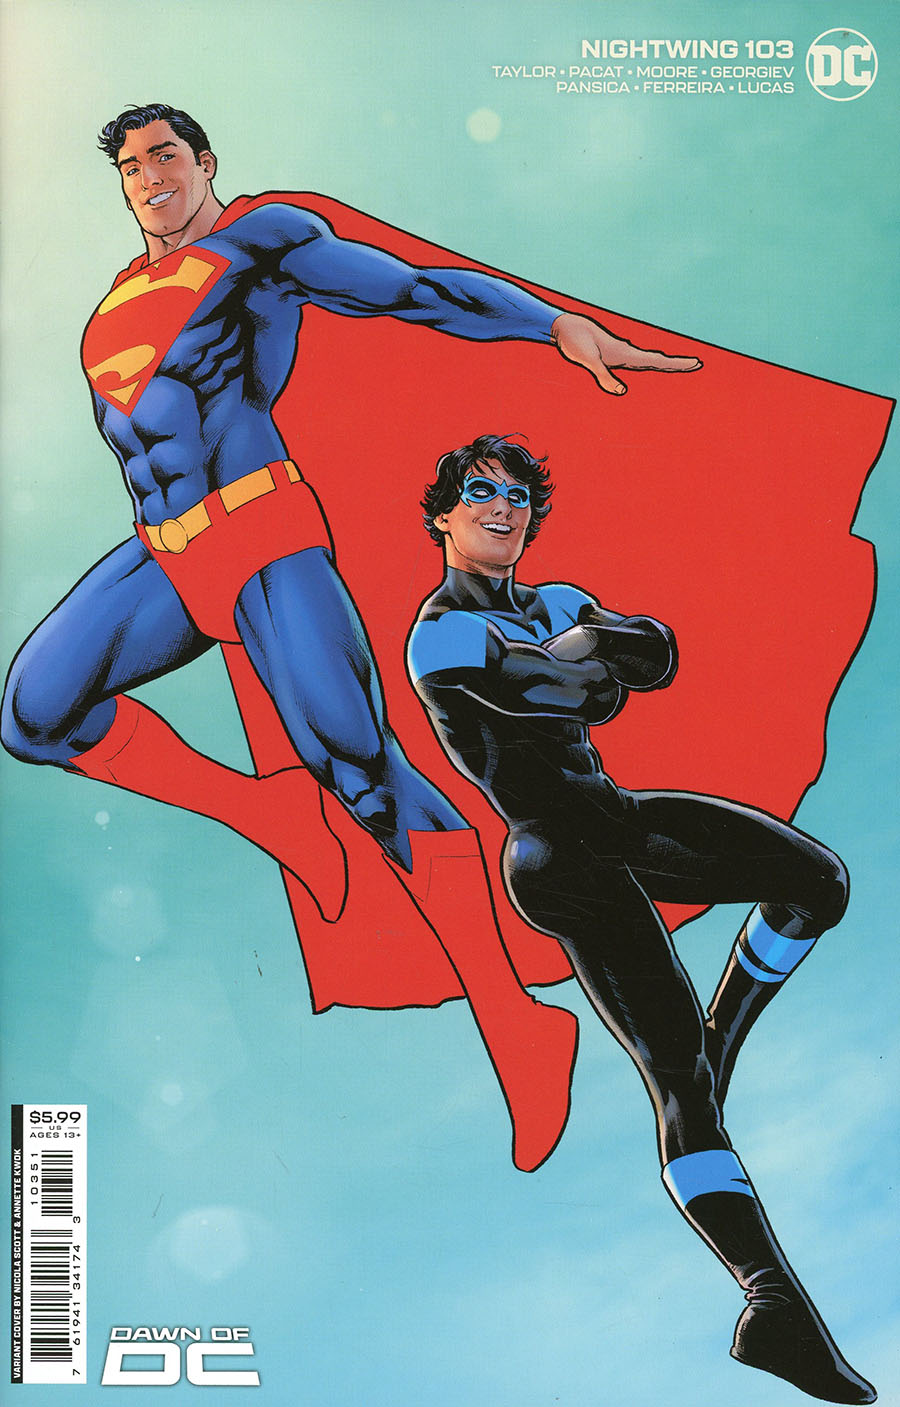 Nightwing Vol 4 #103 Cover D Variant Nicola Scott Superman Card Stock Cover